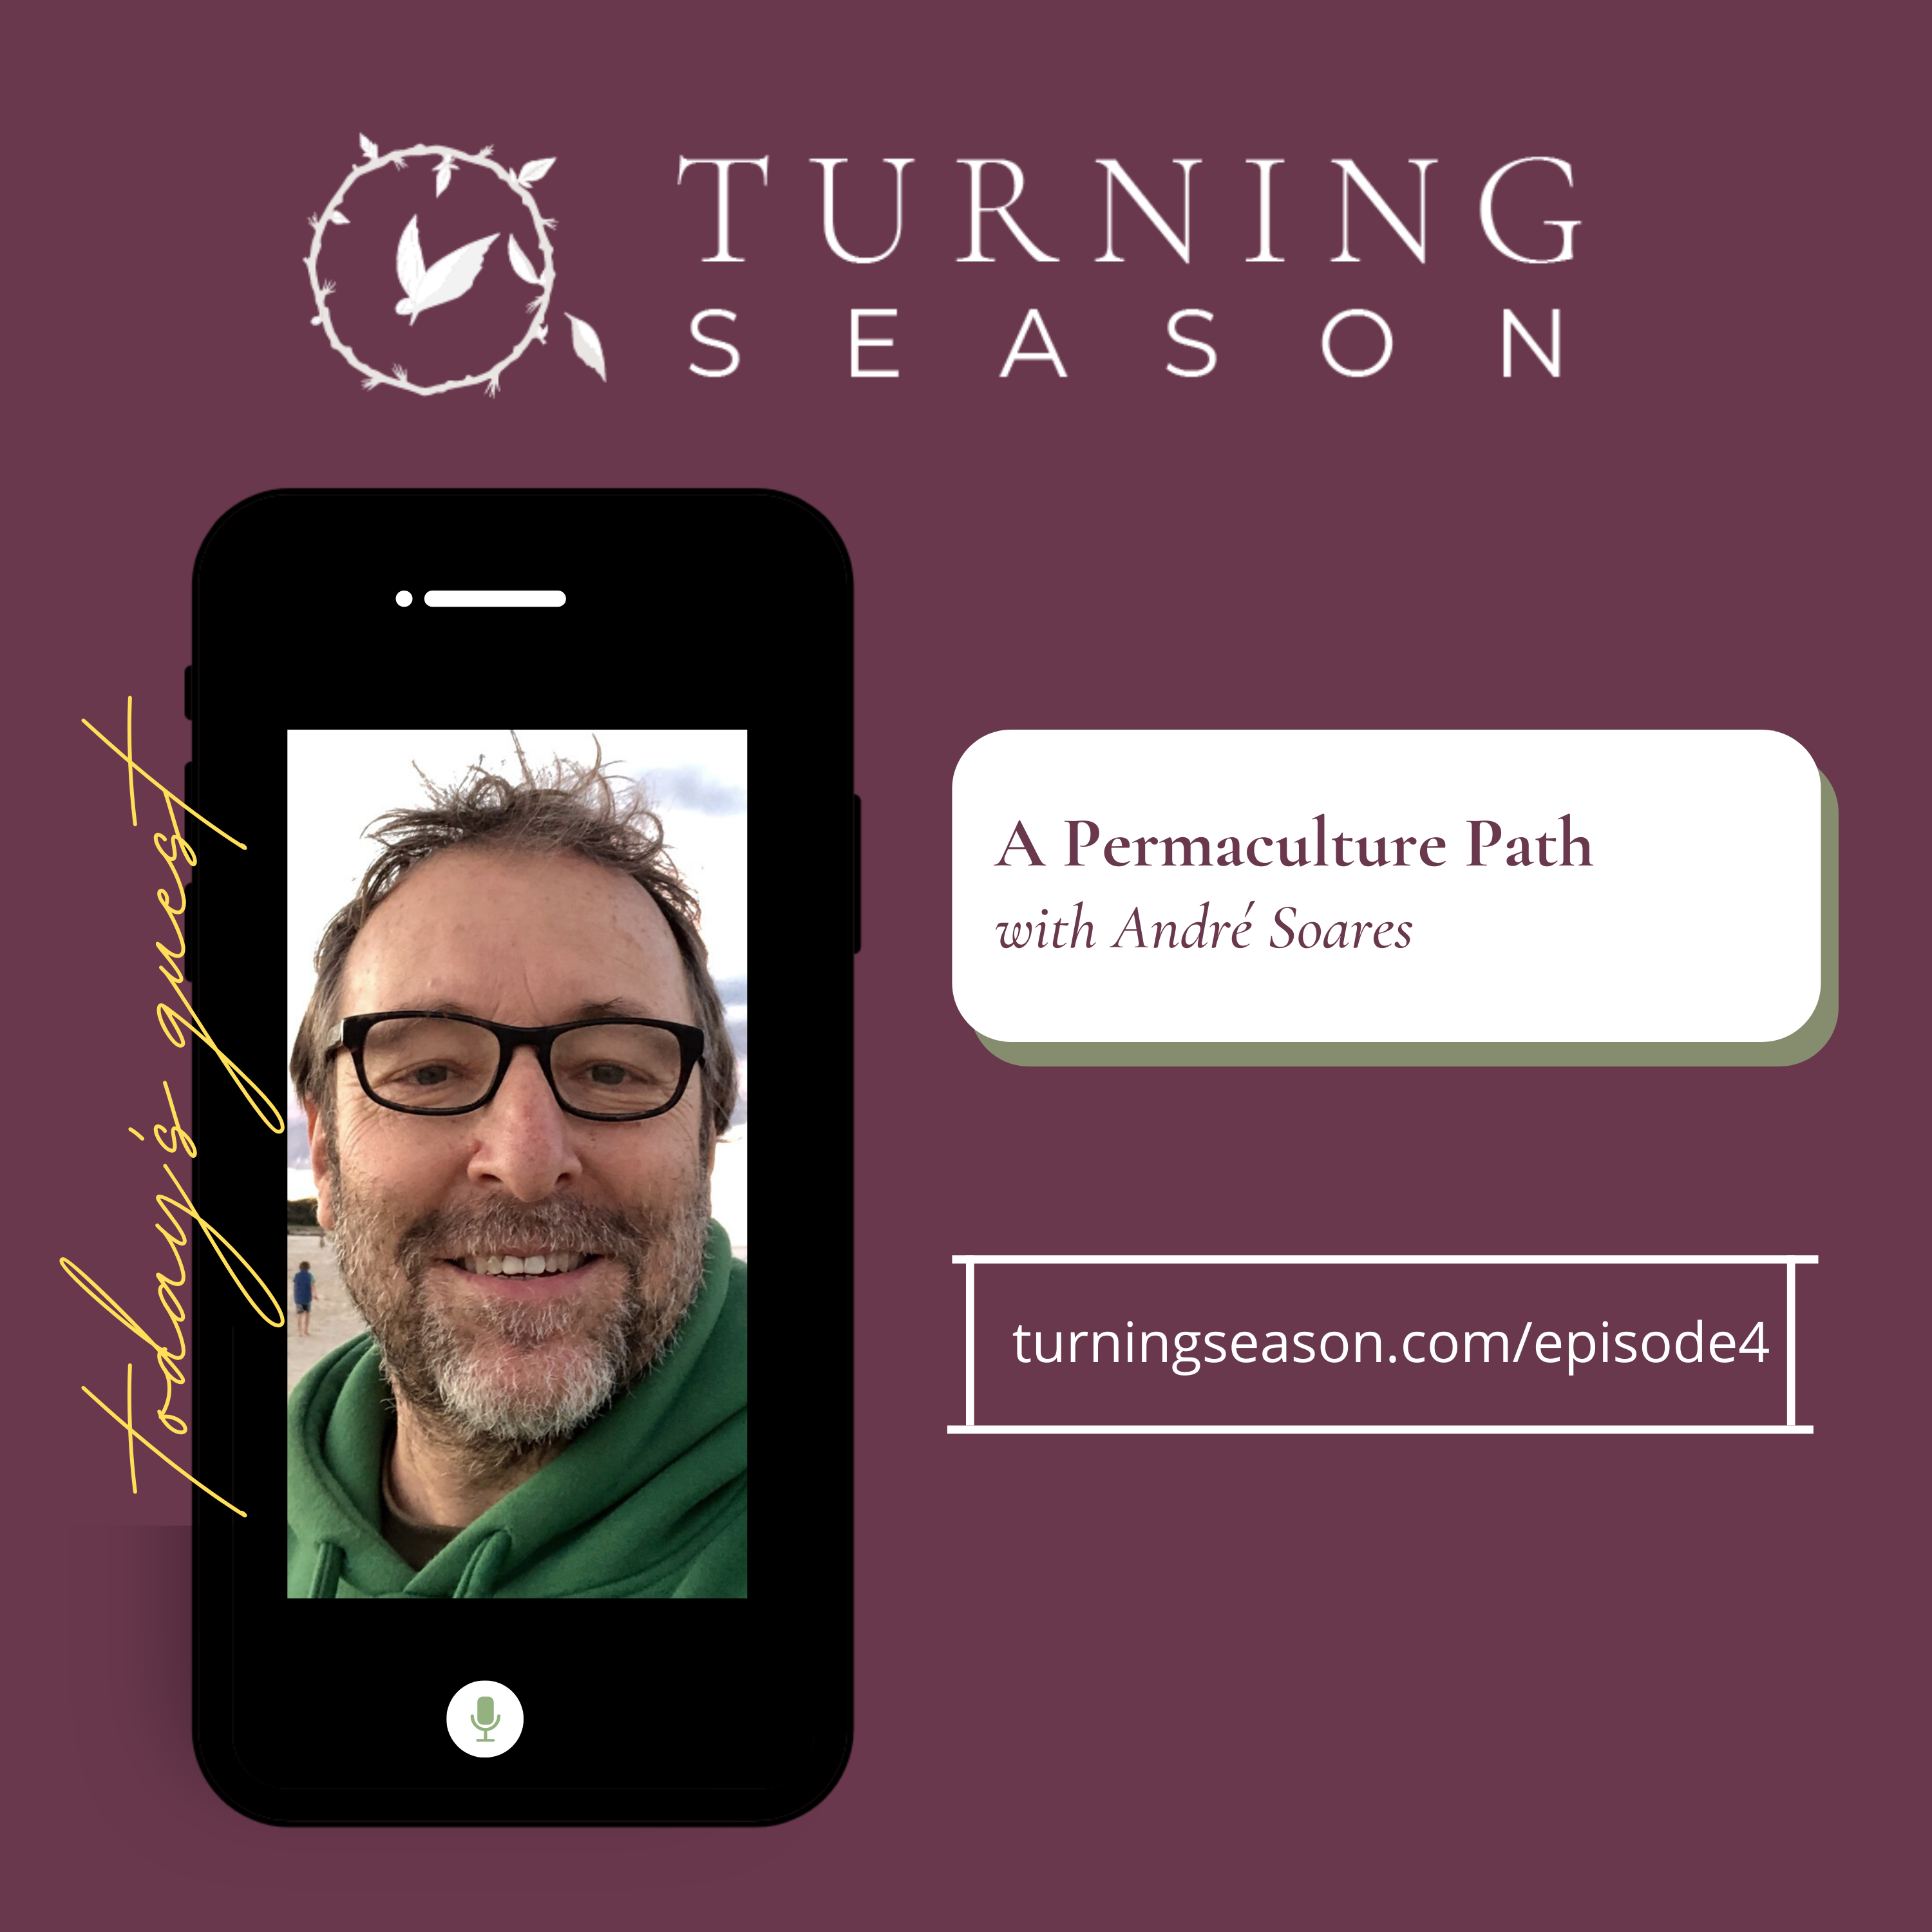 Turning Season Podcast Episode 4 A Permaculture Path with André Soares hosted by Leilani Navar turningseason.com